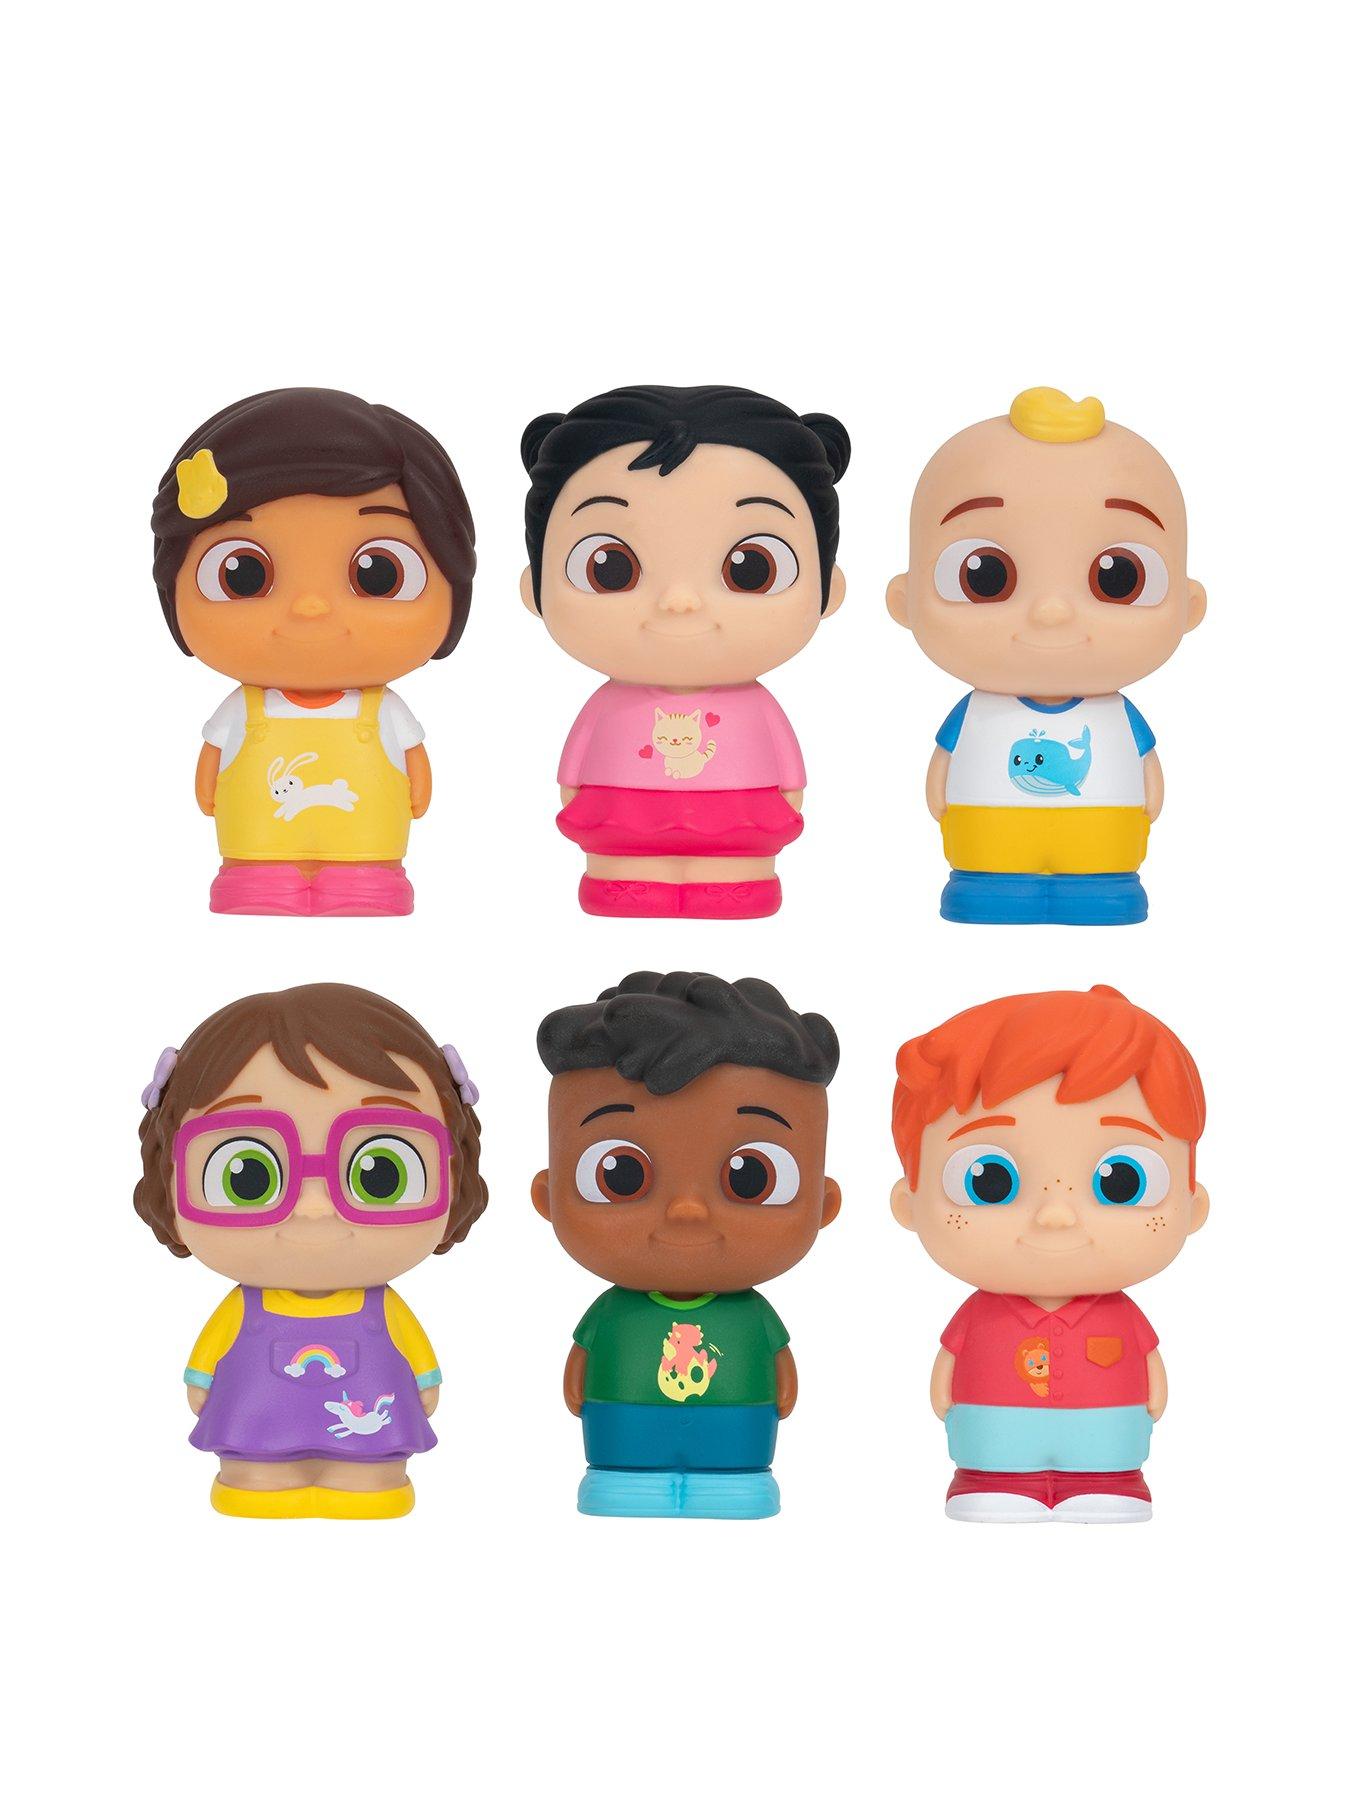 COCOMELON PACK 6 FIGURINES